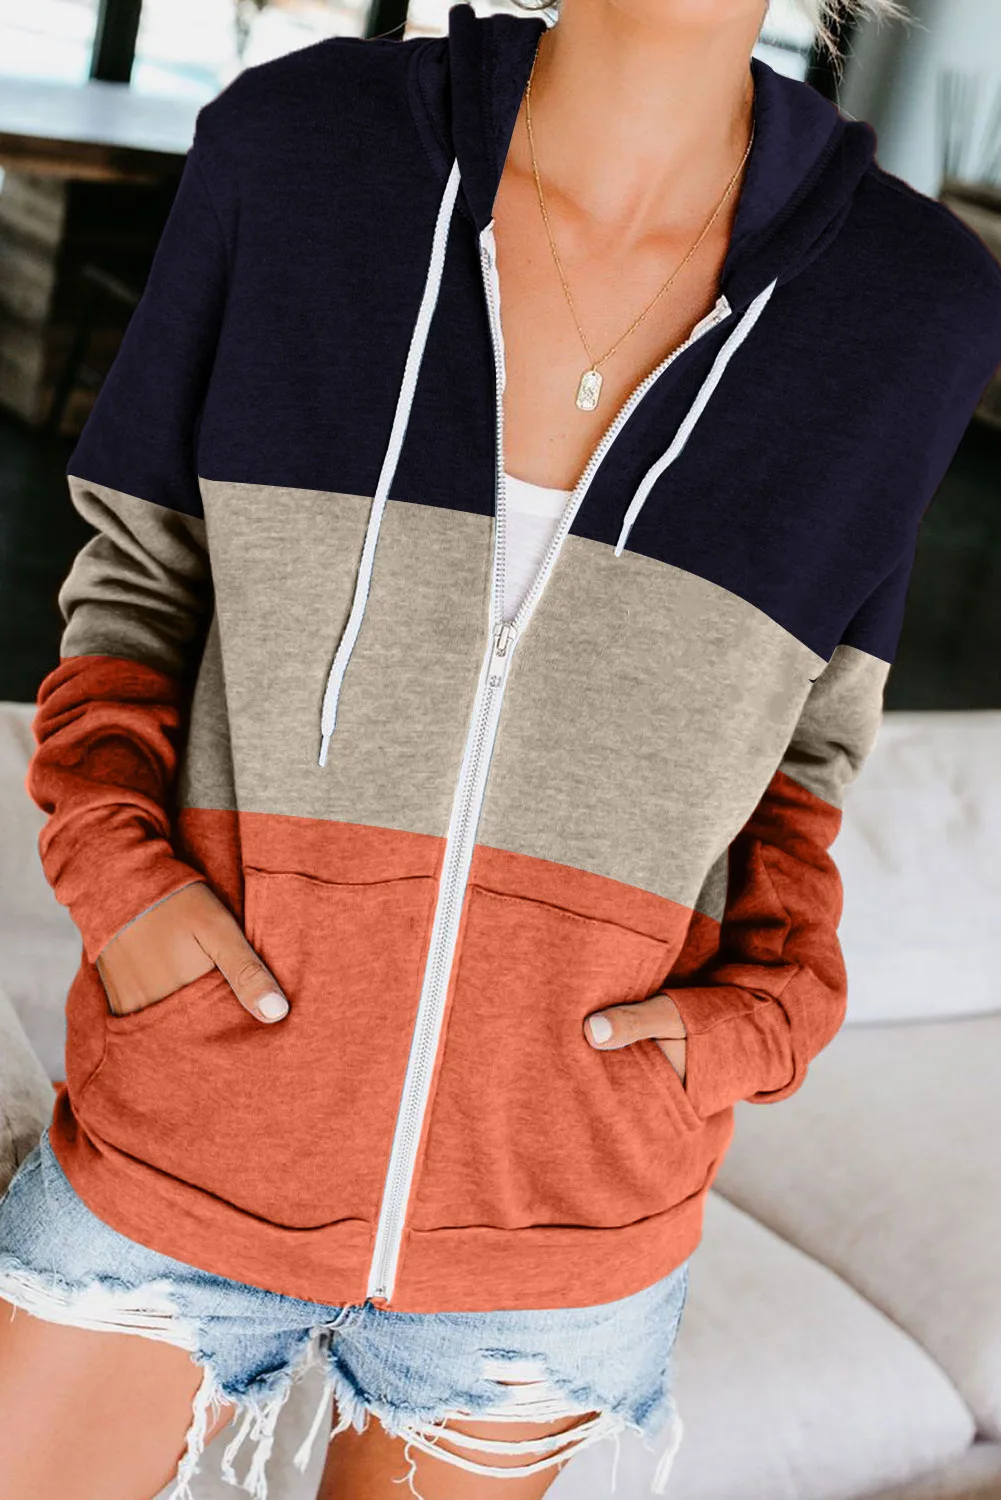 2022 Autumn and Winter European and American Long-sleeved Color Contrast Hooded Sweater Women's Zipper Pocket Cardigan Jacket